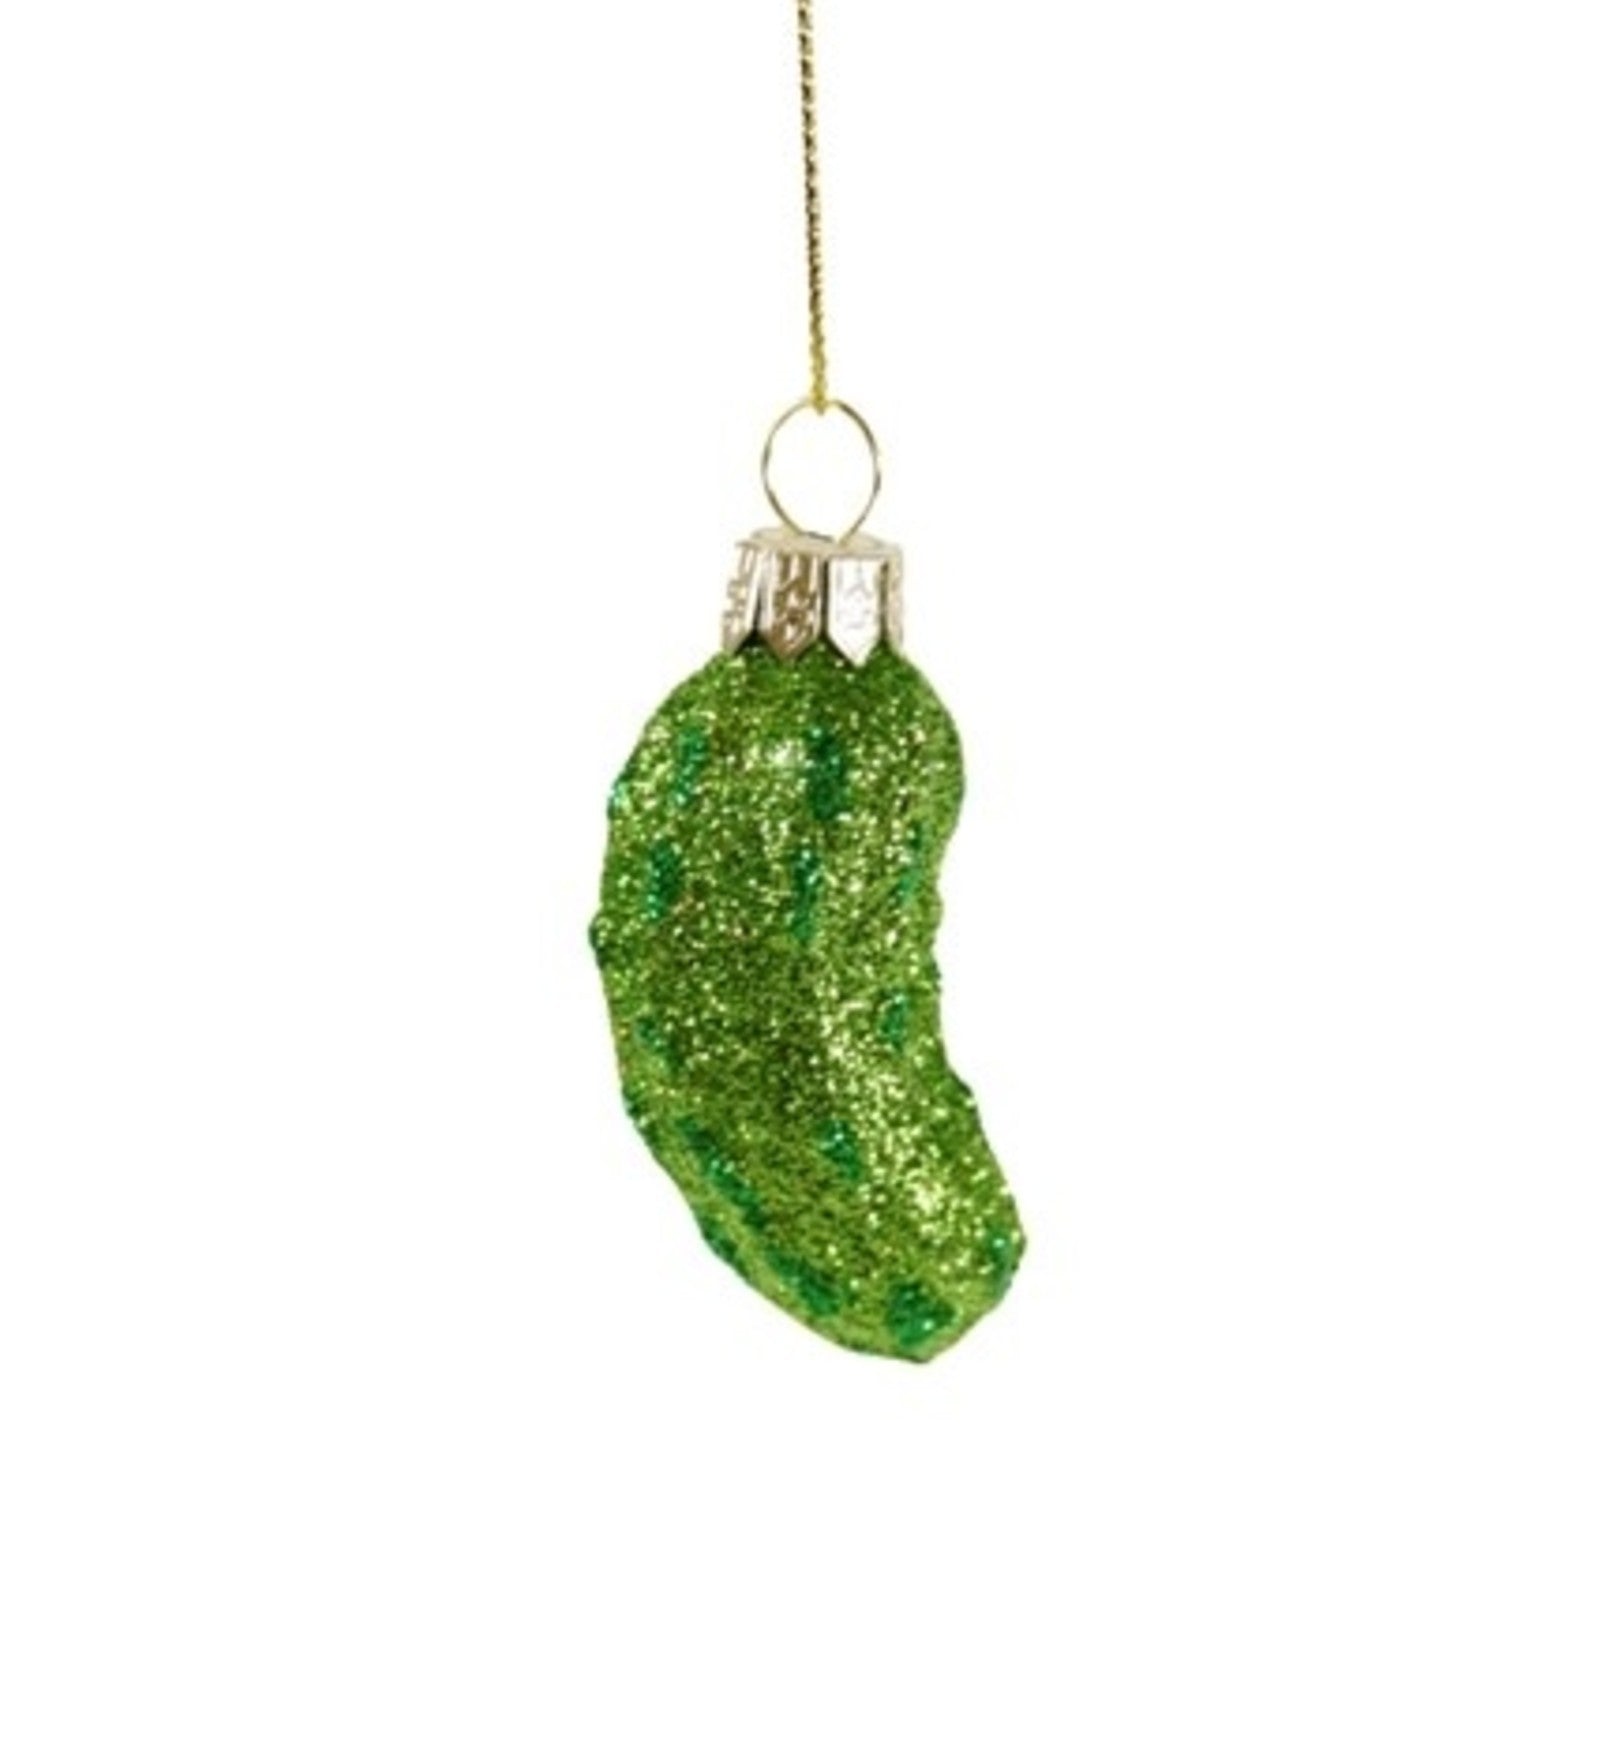 This tiny pickle ornament is ideal for any foodie's tree